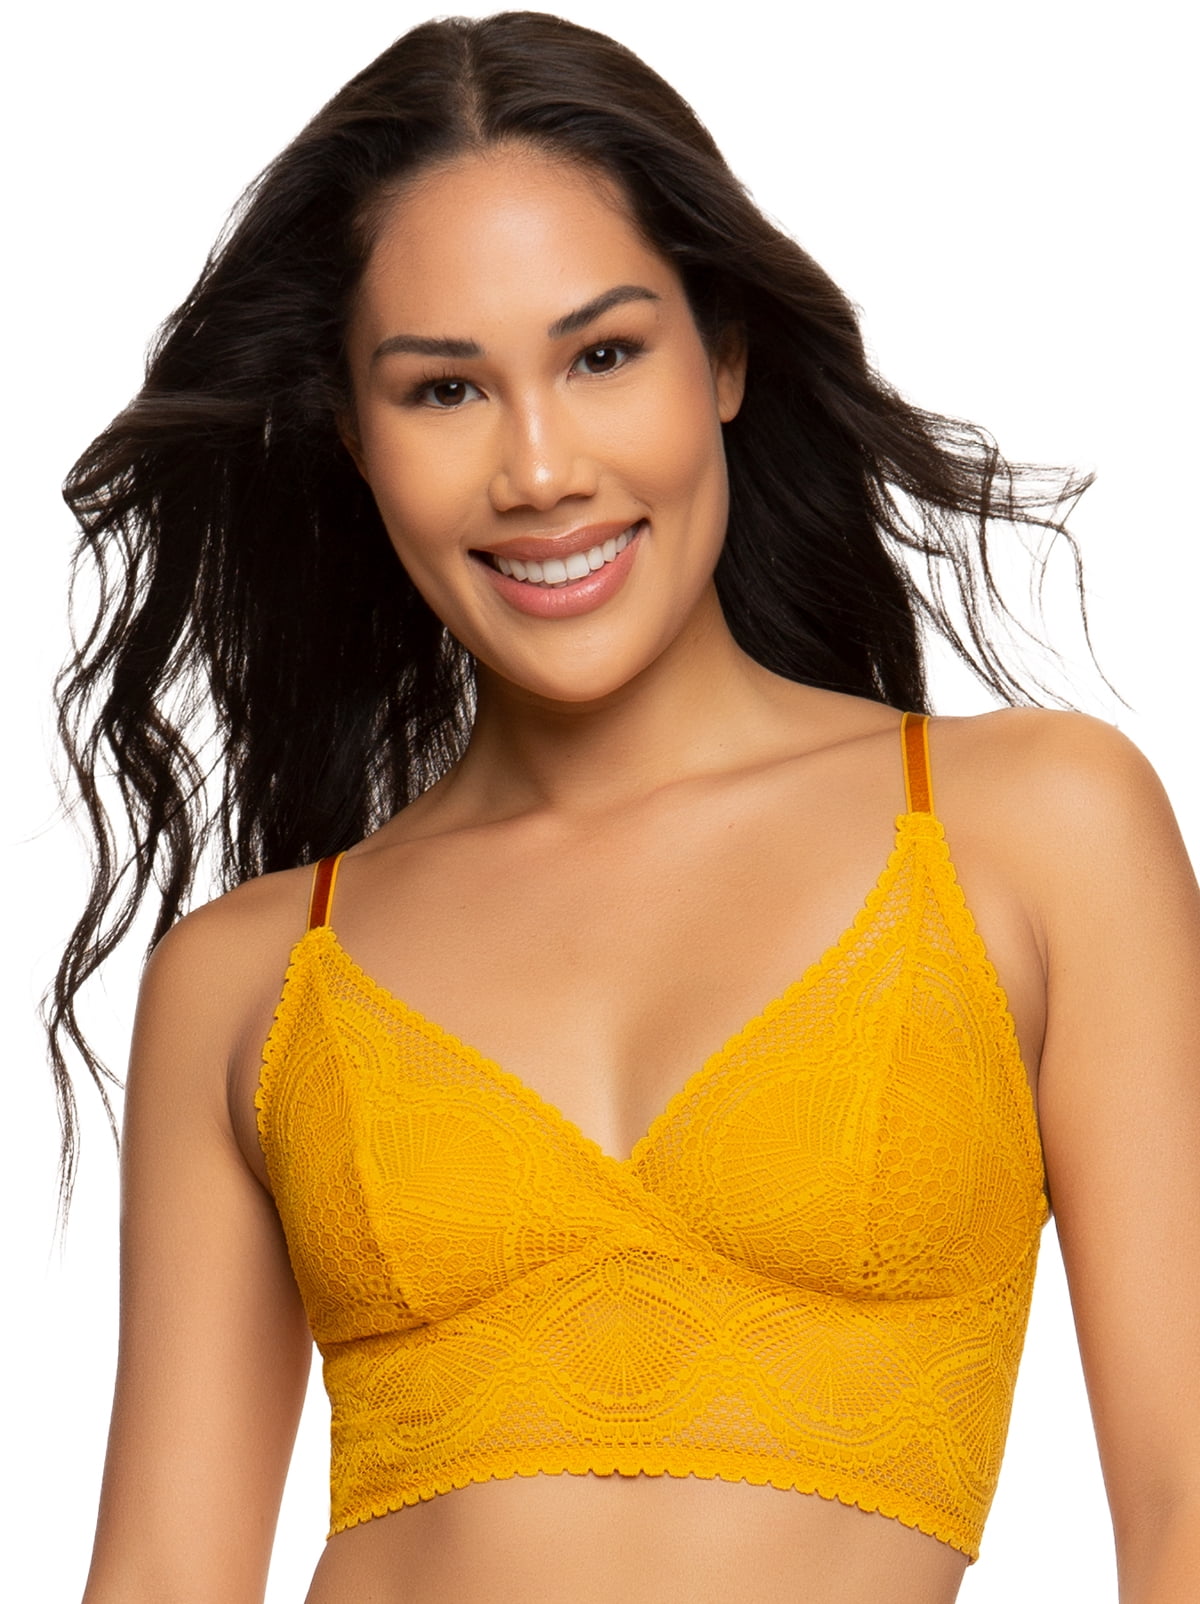 Felina Finesse Cami Bralette - Stretchy Lace Bralettes For Women - Sexy and  Comfortable - Inclusive Sizing, From Small To Plus Size. (Black Lily, 1X-2X)  